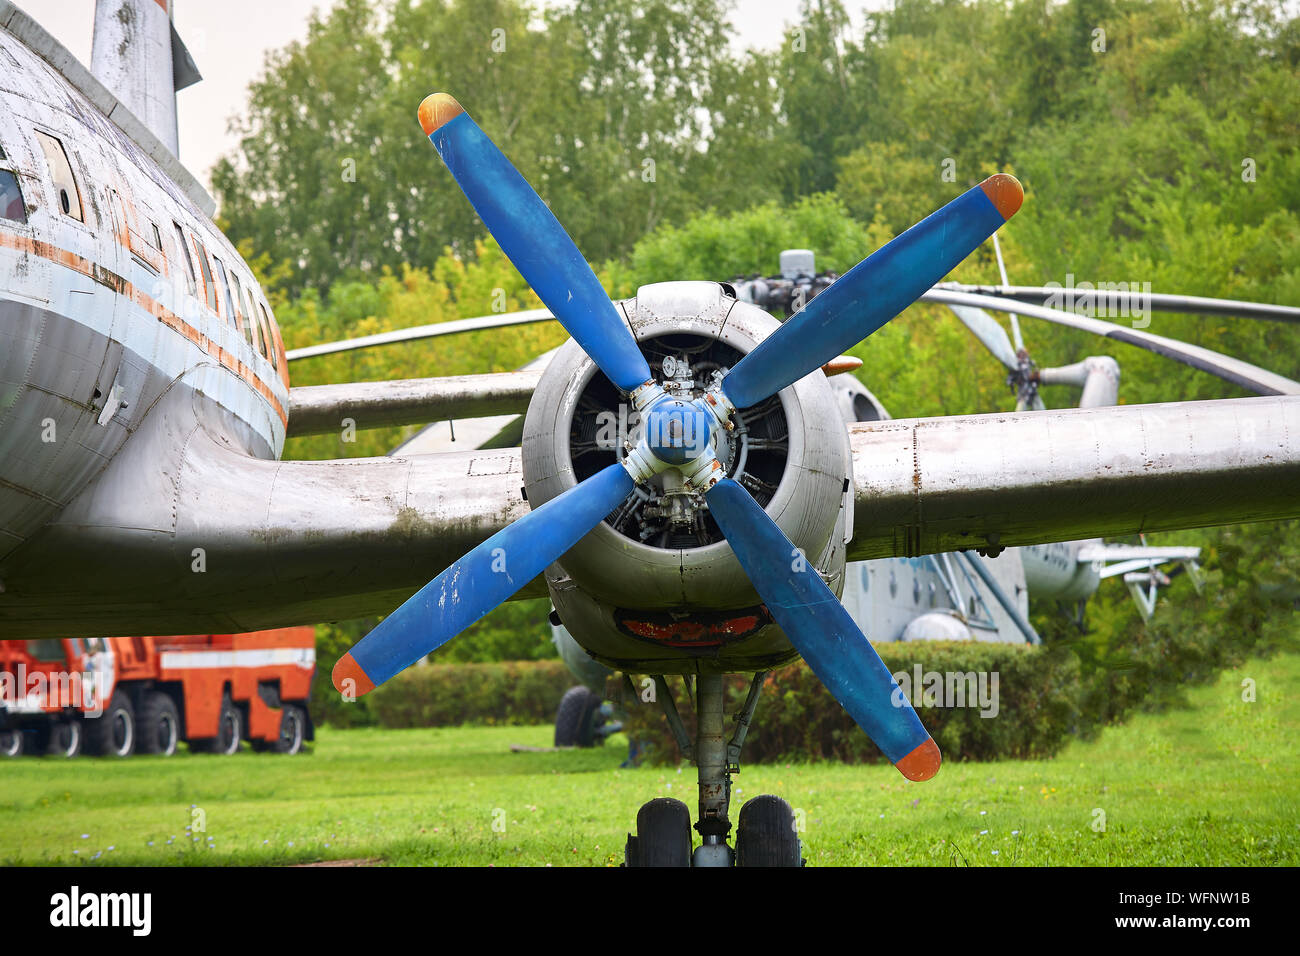 Elements of the old military plane close-up. Stock Photo